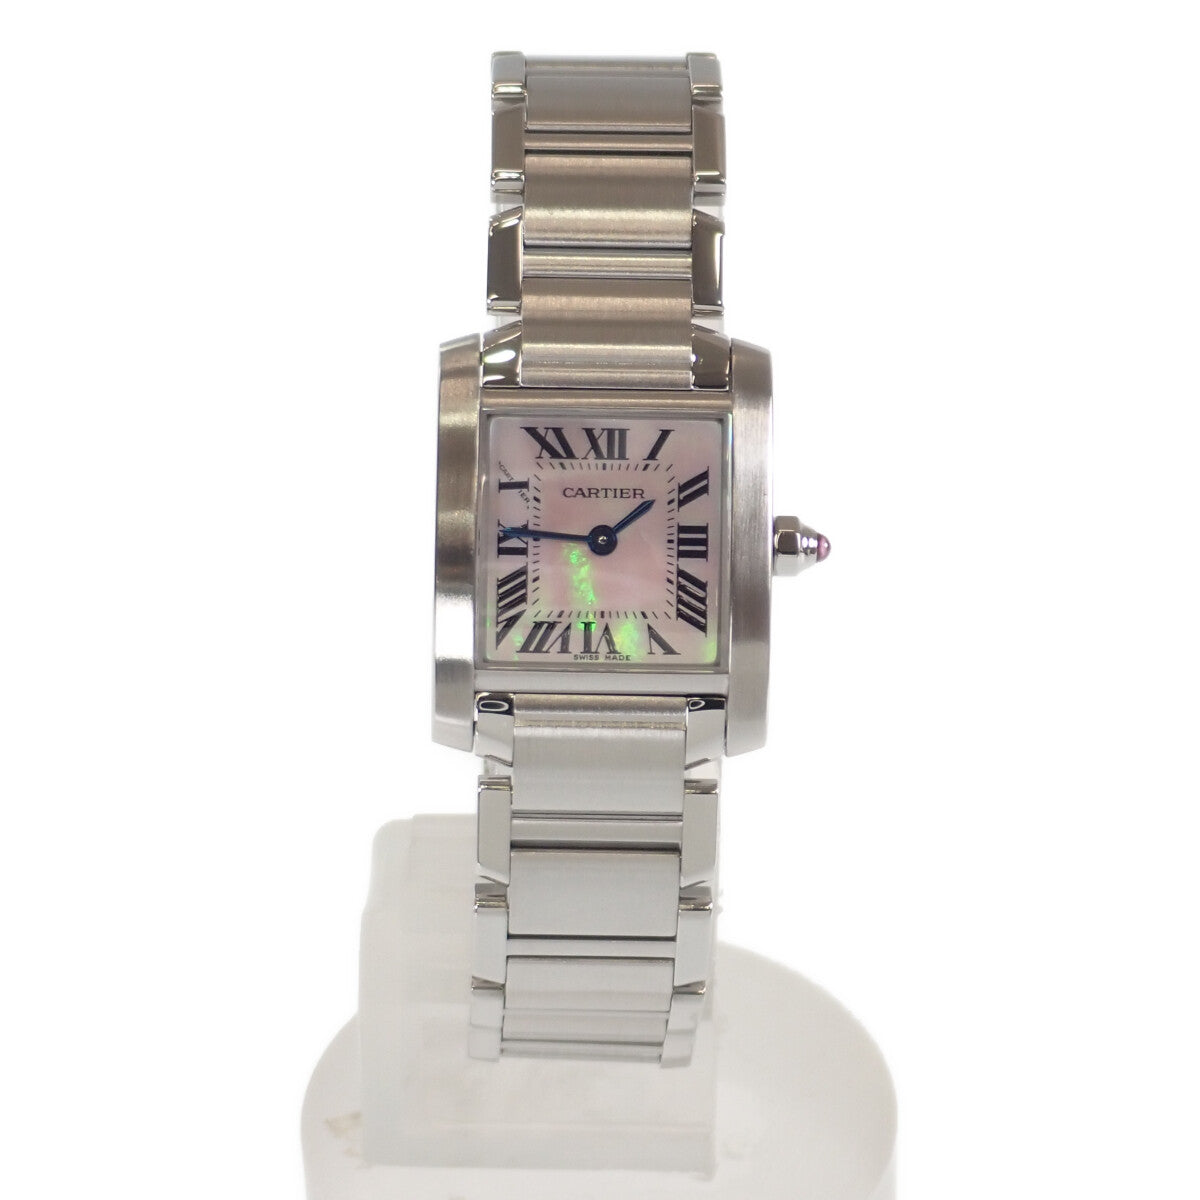 Cartier Tank Francaise SM Women's Wristwatch W51028Q3, Stainless Steel, Pink Shell Dial - Used Condition W51028Q3